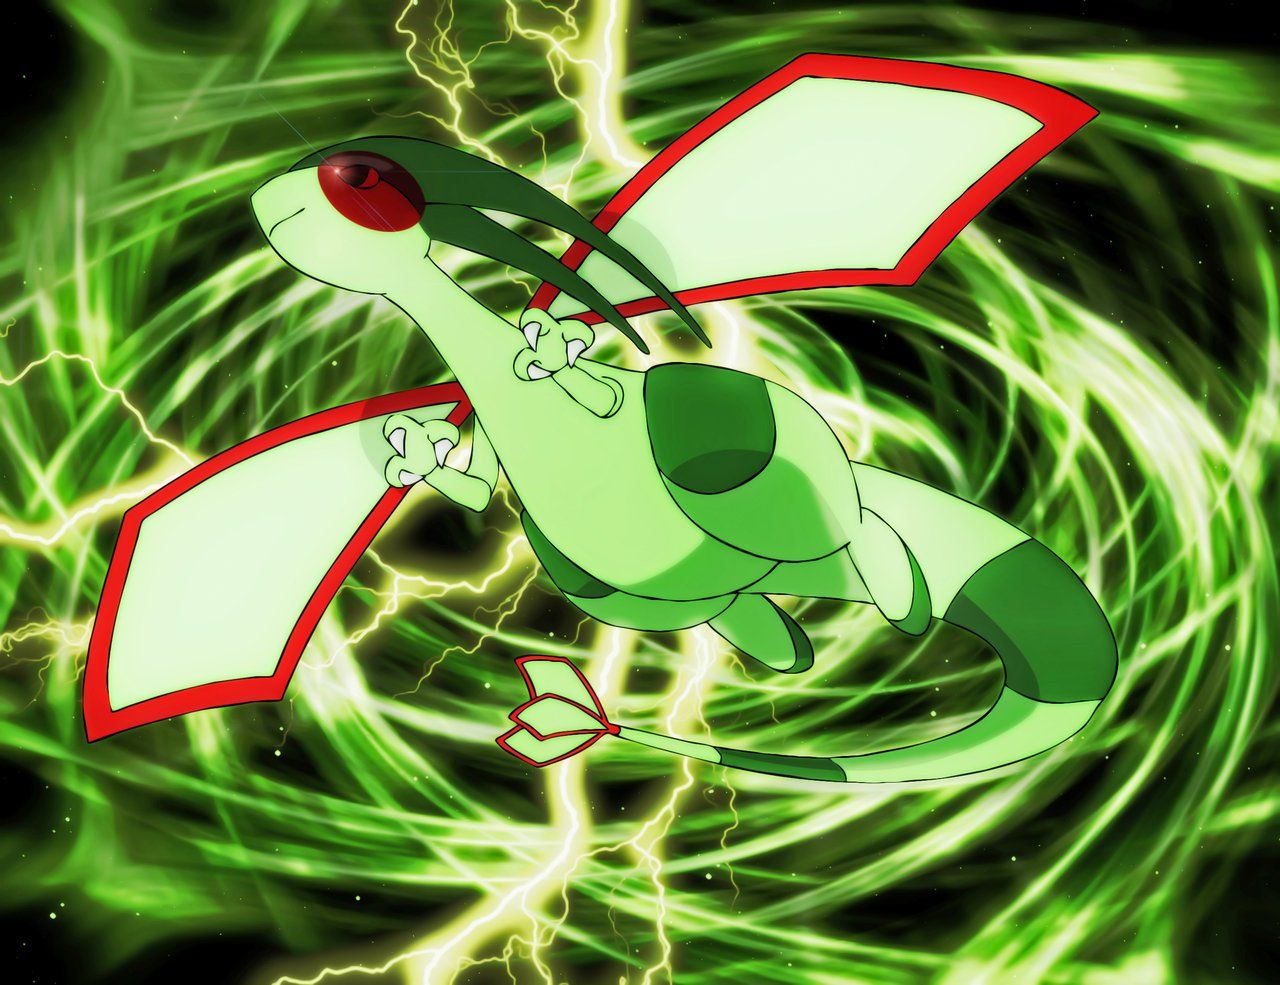 Flygon Anthro Wallpapers